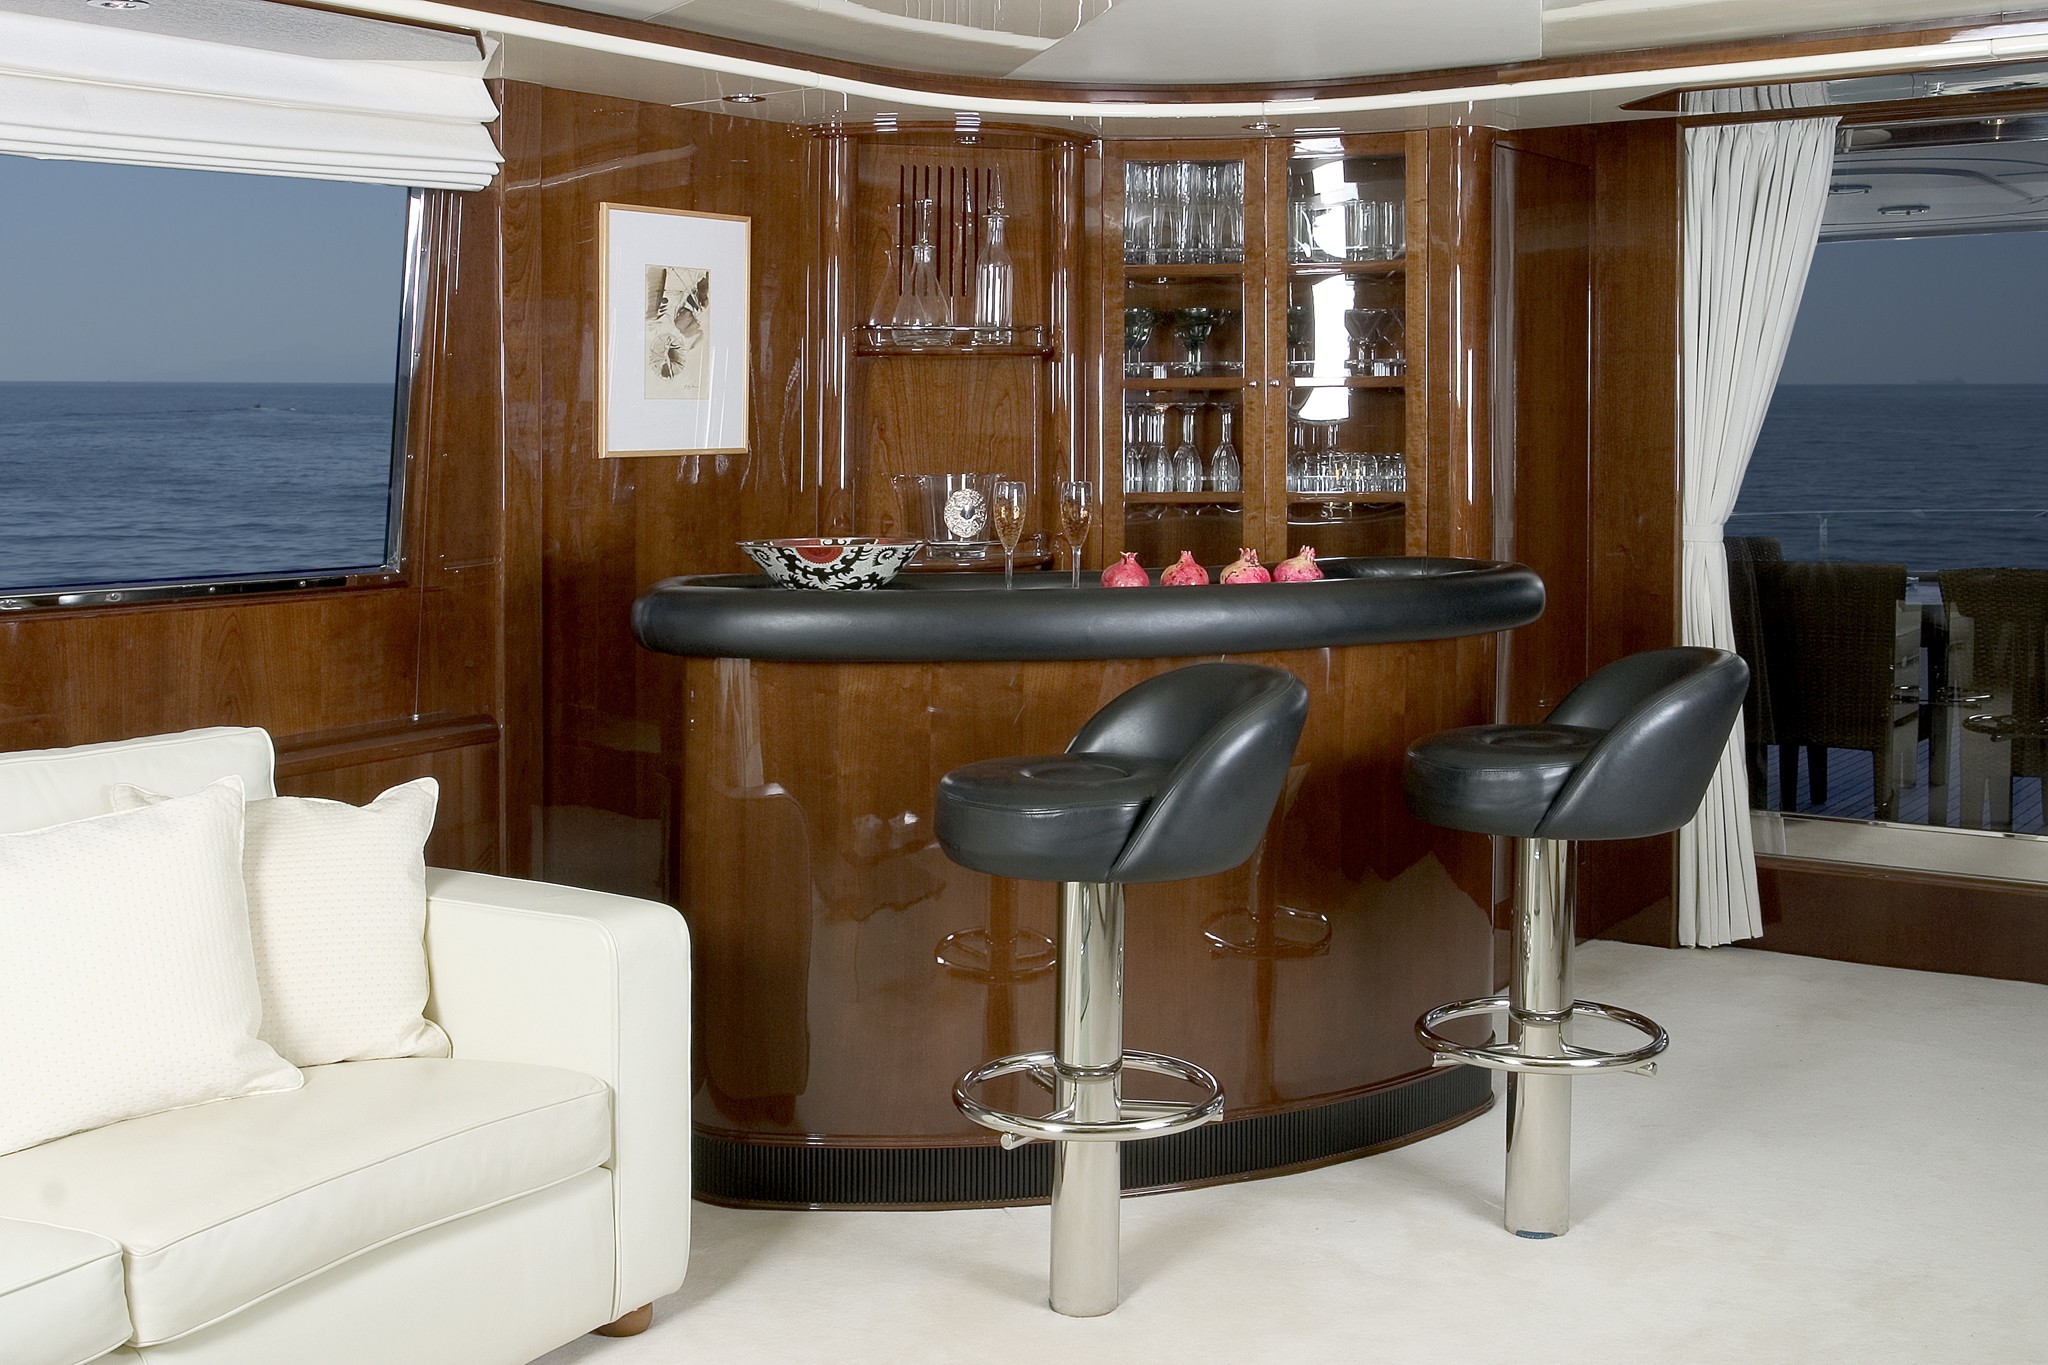 Saloon Drinks Bar On Yacht LET IT BE